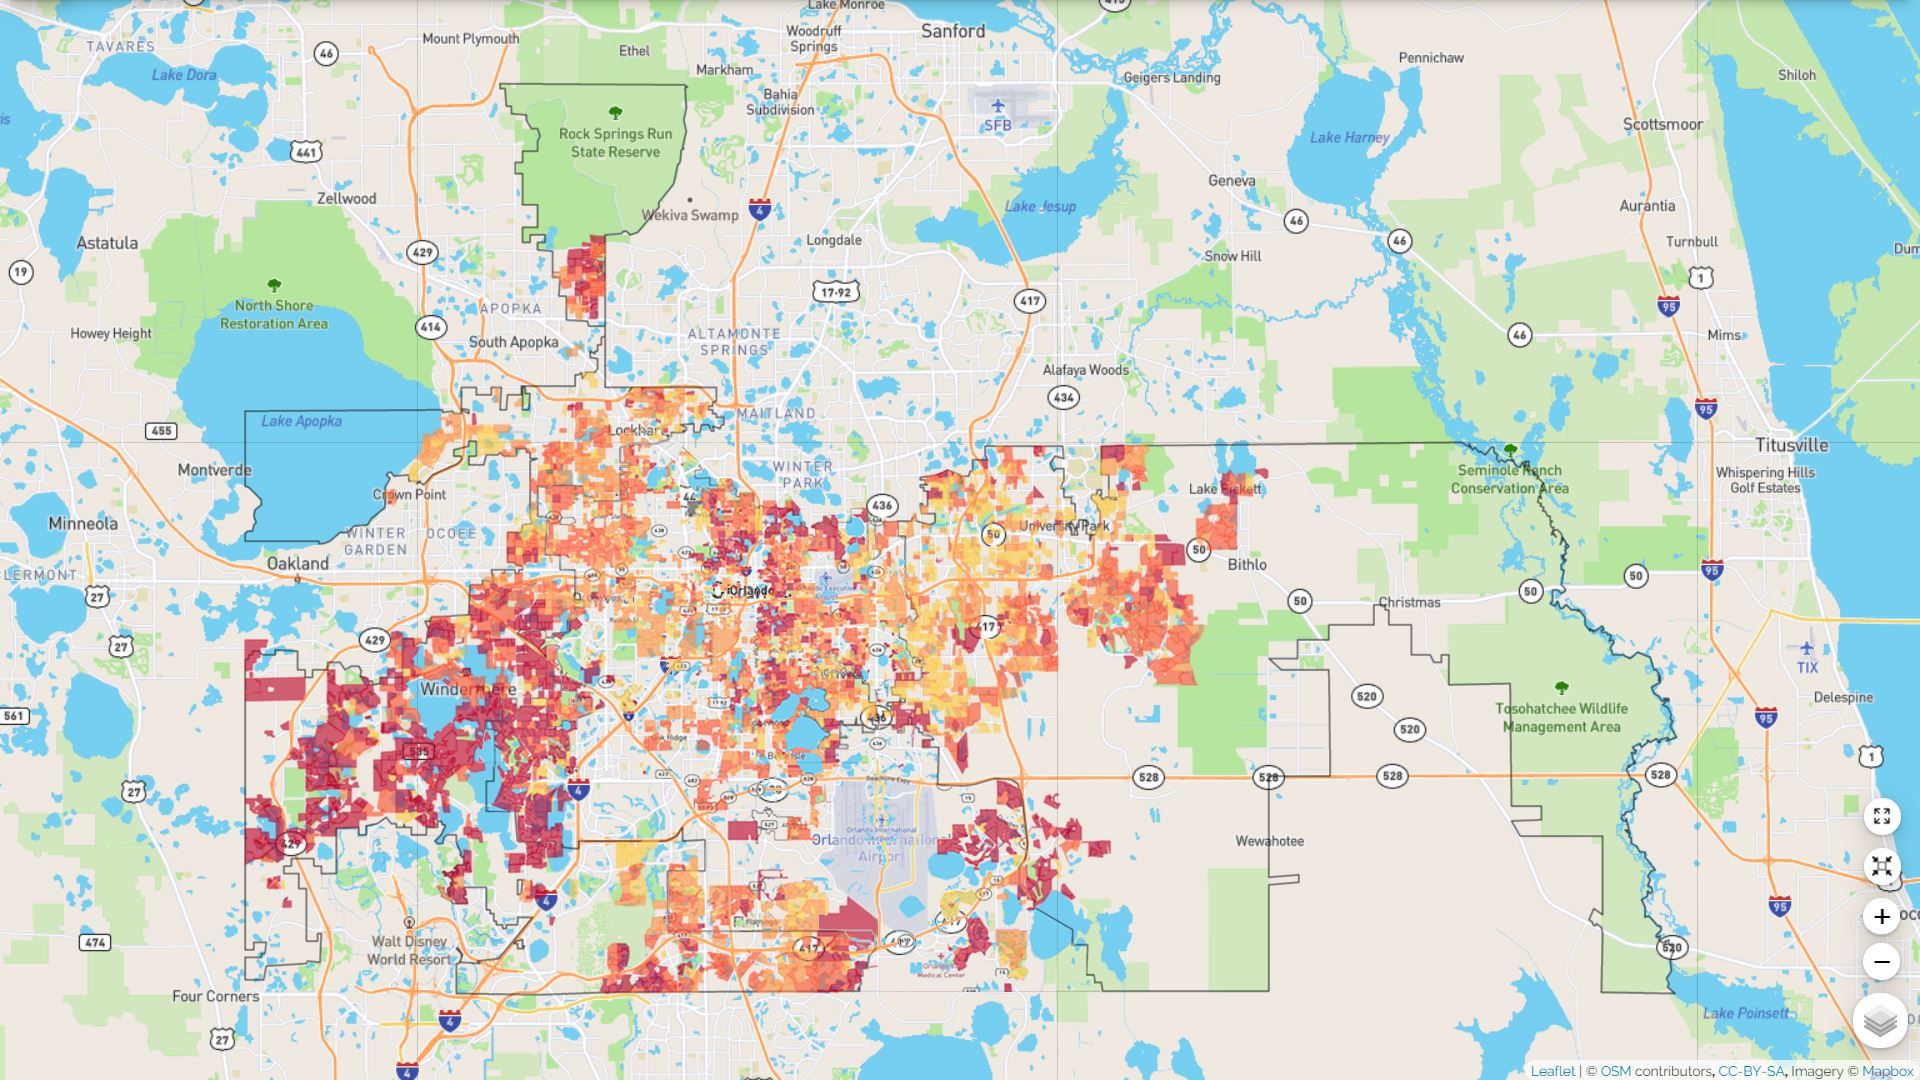 Water consumption in Orange County, Florida. Color coding shows how some subdivisions use more water than others. Darker colors mean a higher water use.